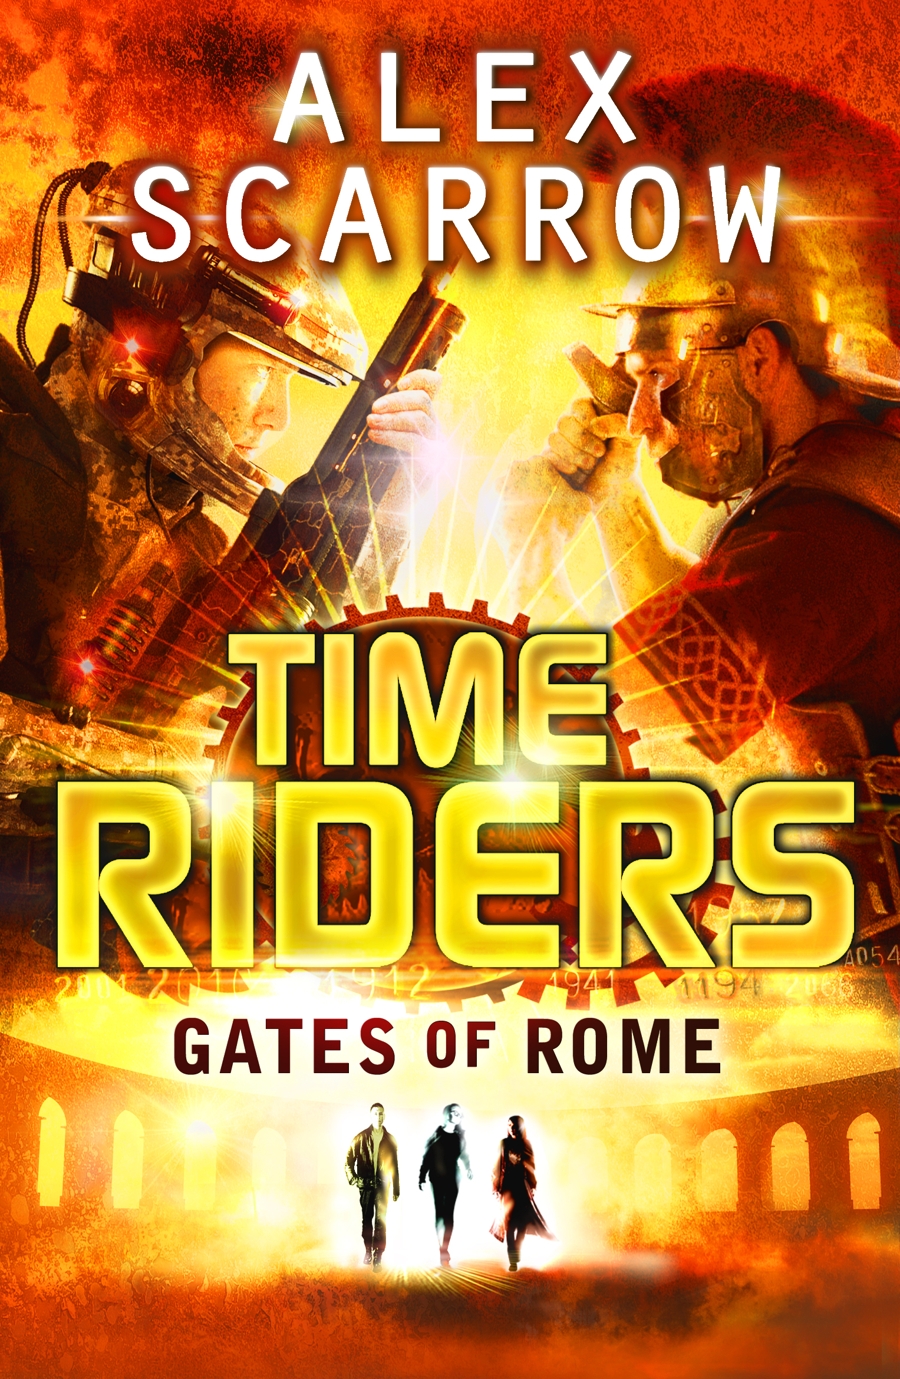 the gates of rome review